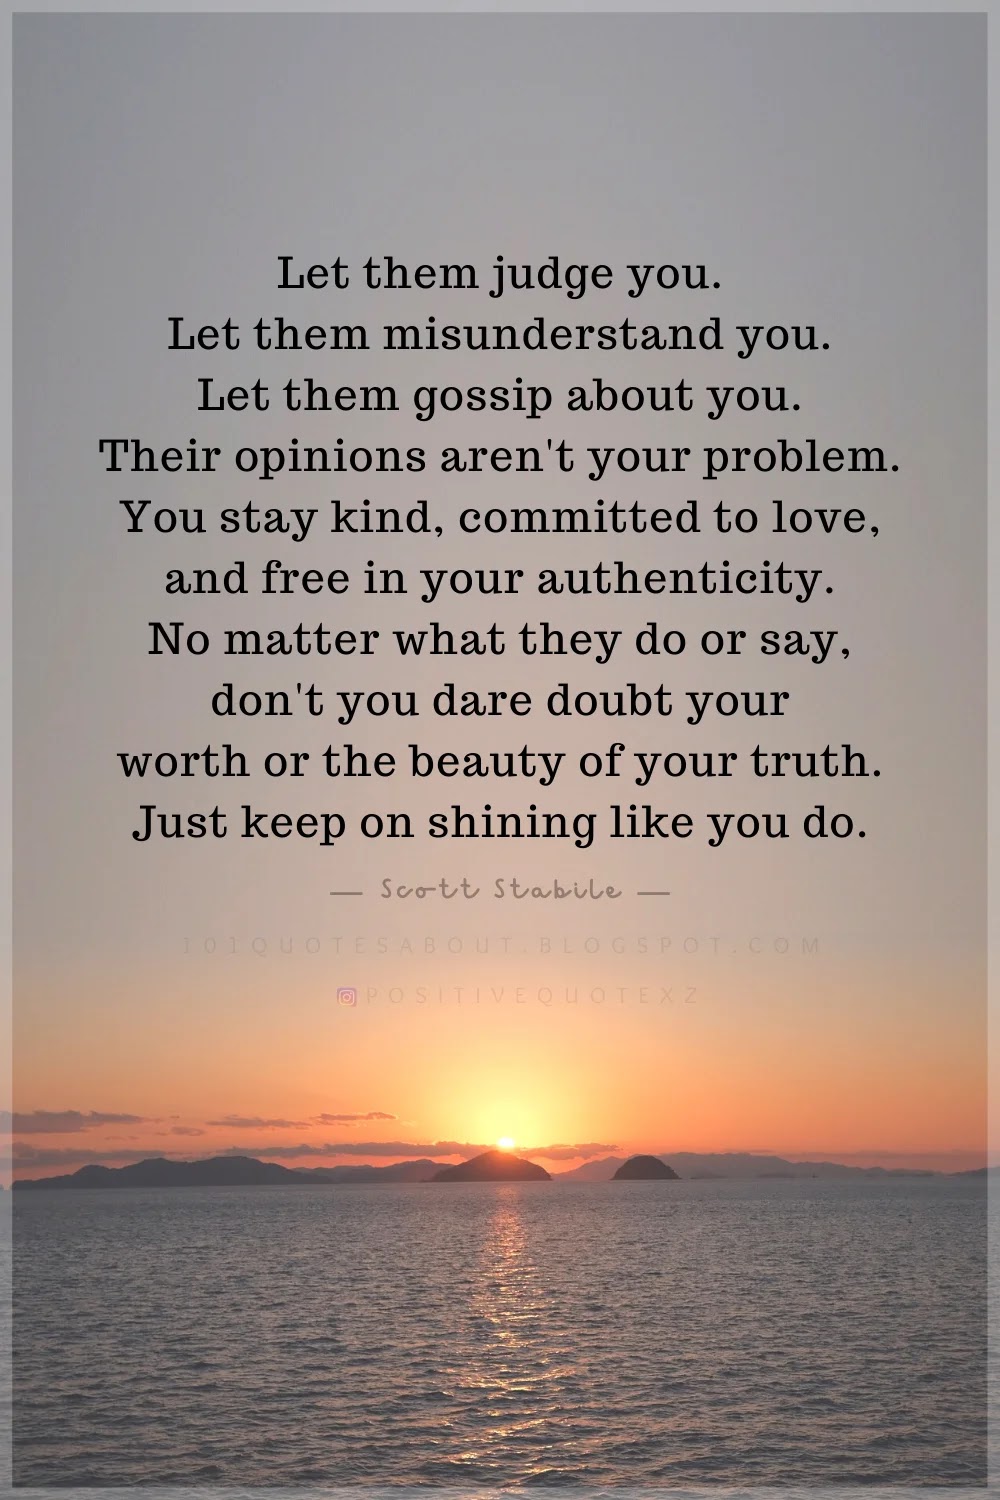 Let them judge you. Let them misunderstand you. Let them gossip about you. Their opinions aren't your problem. You stay kind, committed to love, and free in your authenticity. No matter what they do. authenticity quotes